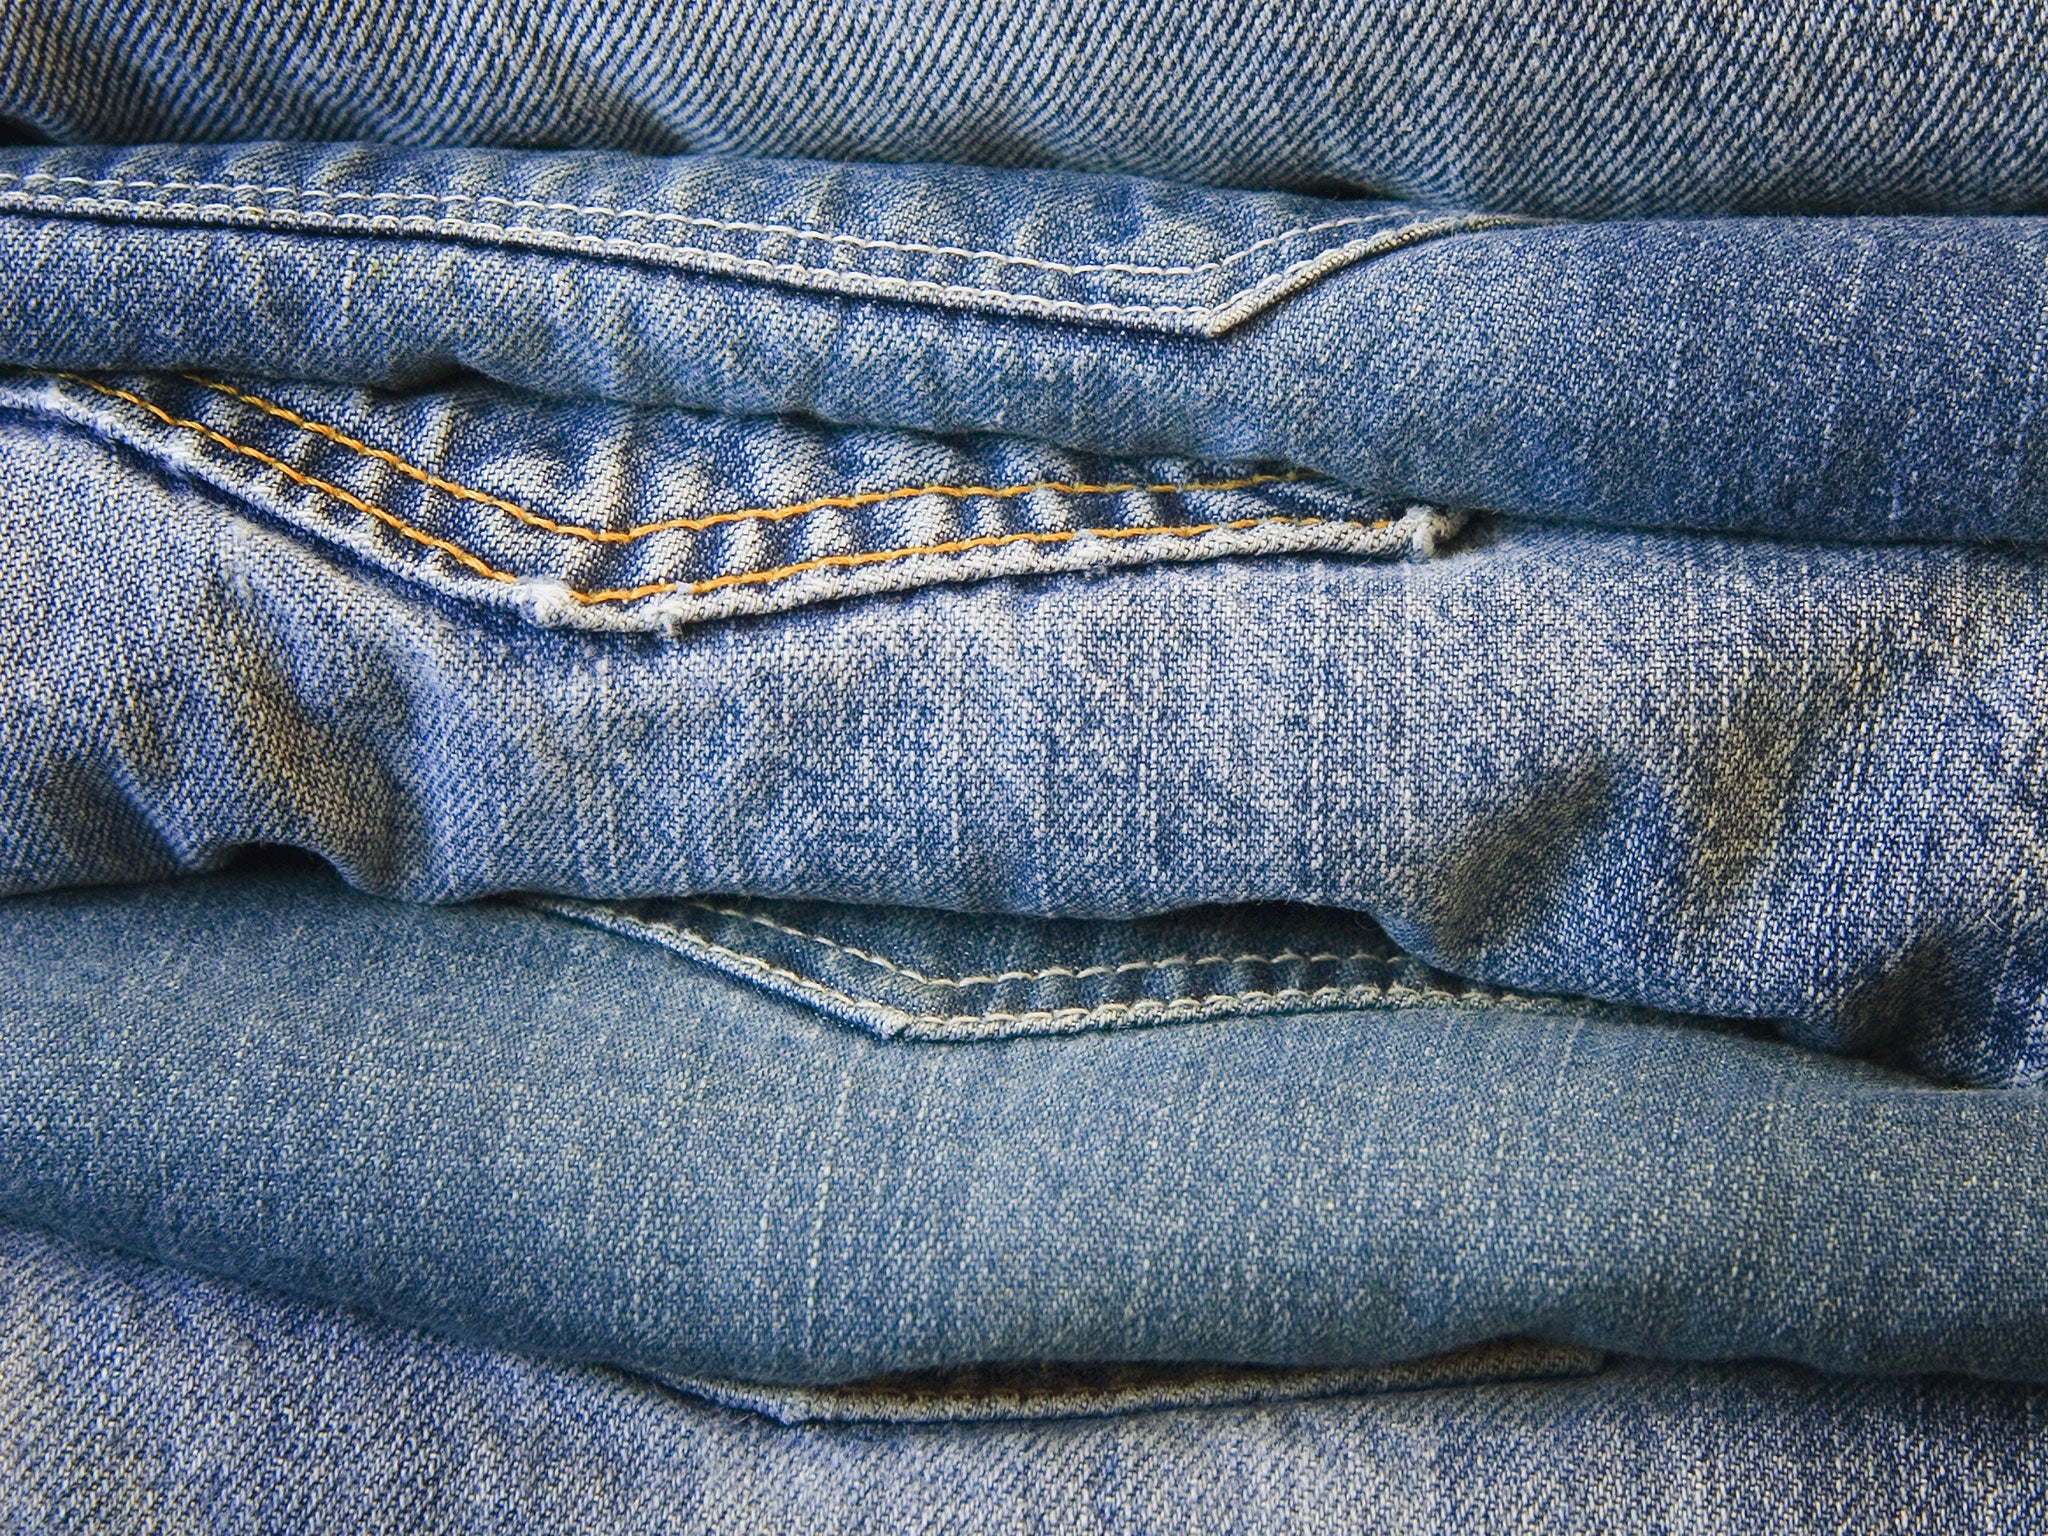 Levi S Former Denim Brand Big E Up For Sale The Independent The Independent